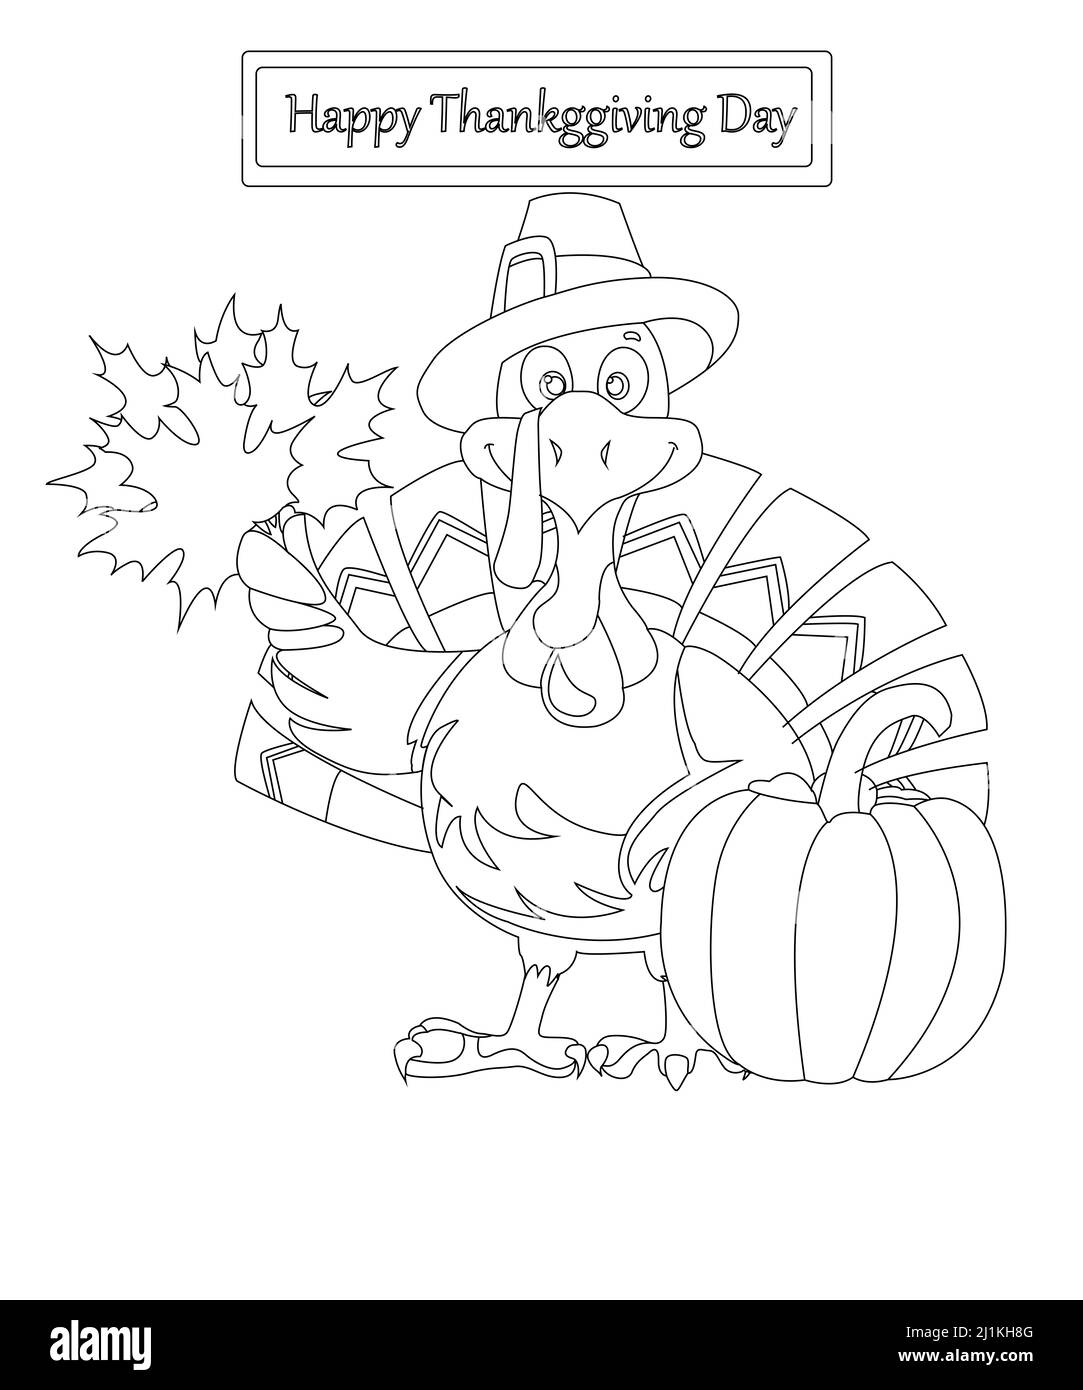 Thanks Giving Coloring Page For kids and aduls Stock Photo